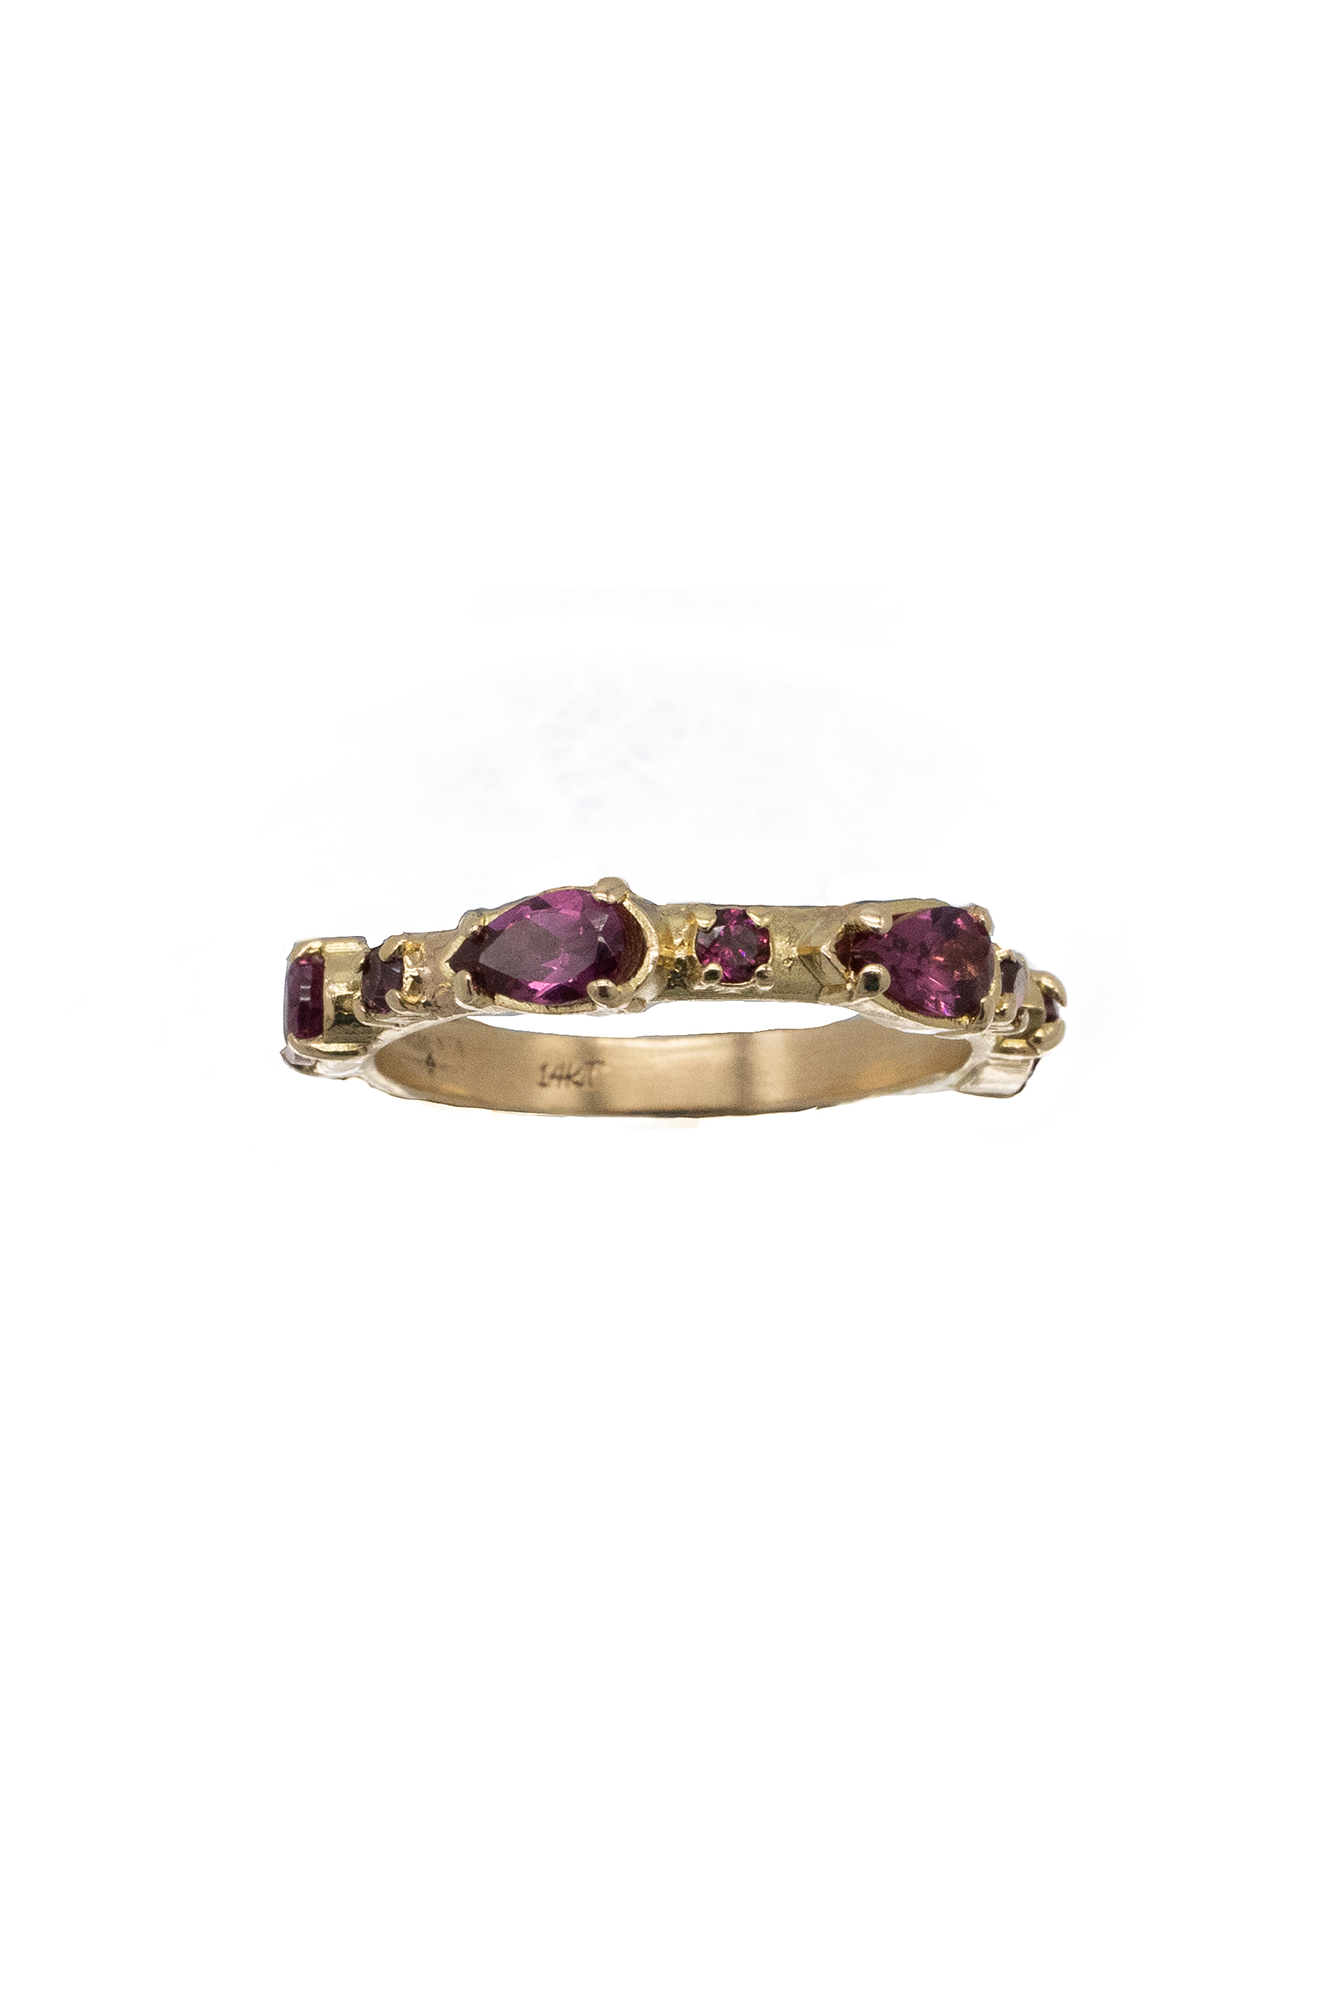 This 14K Rose Gold with Pear Rhodolite Ring from Armenta will make a beautiful addition to any jewelry collection. Crafted from the finest materials, this ring features a genuine rhodolite stone surrounded by a unique setting. The 14K rose gold plating ensures a luxurious and striking look that will last.